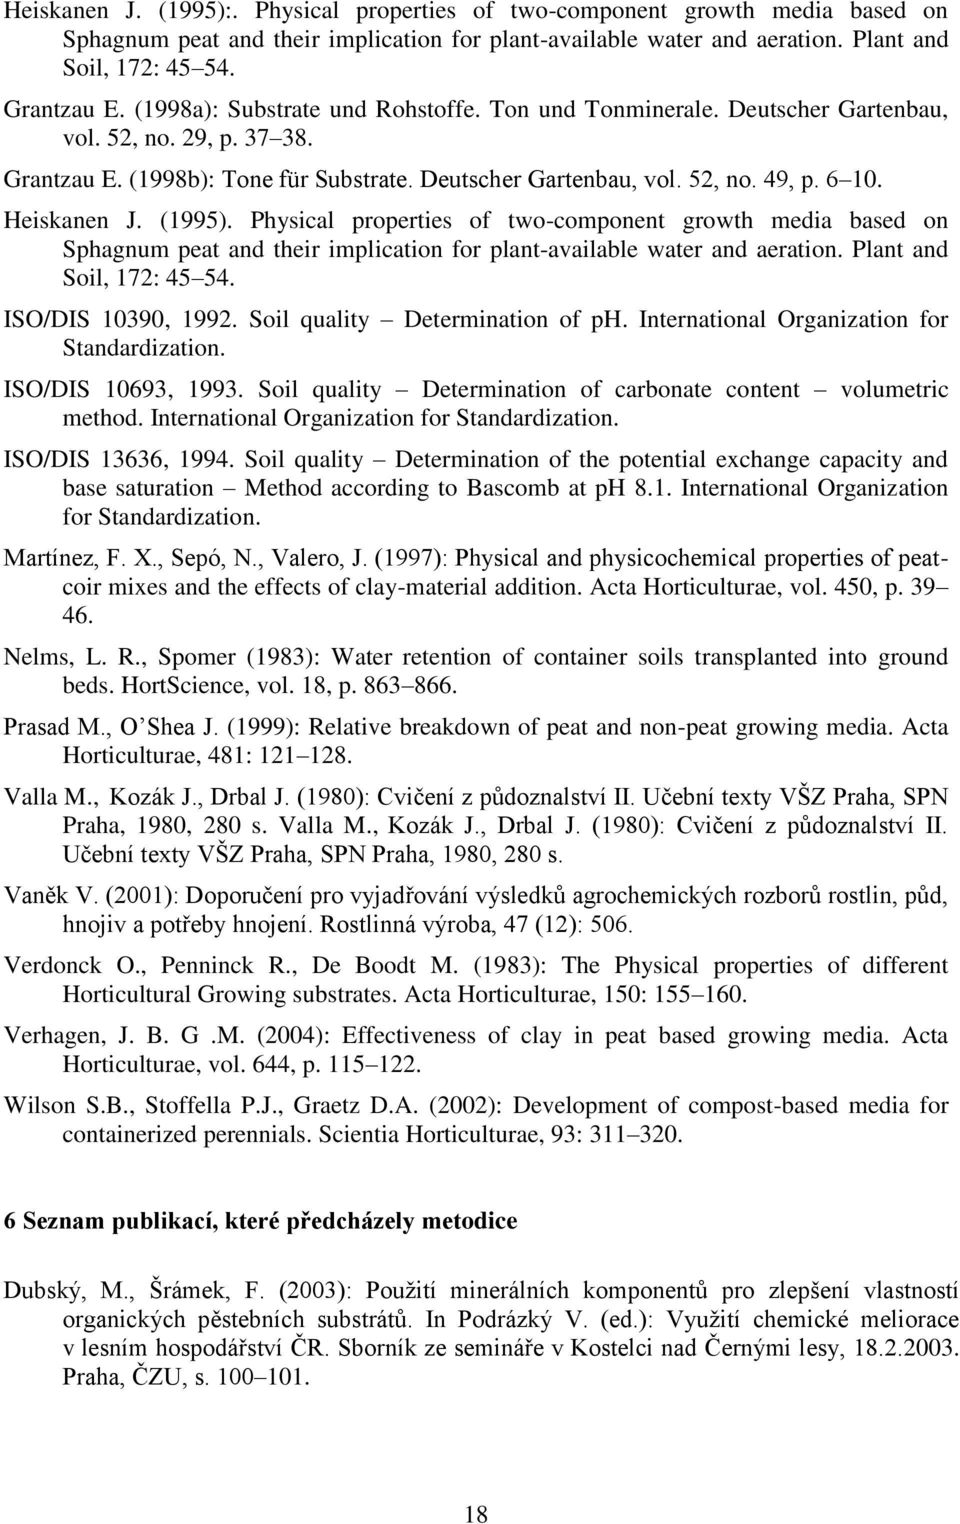 Heiskanen J. (1995). Physical properties of two-component growth media based on Sphagnum peat and their implication for plant-available water and aeration. Plant and Soil, 172: 45 54.